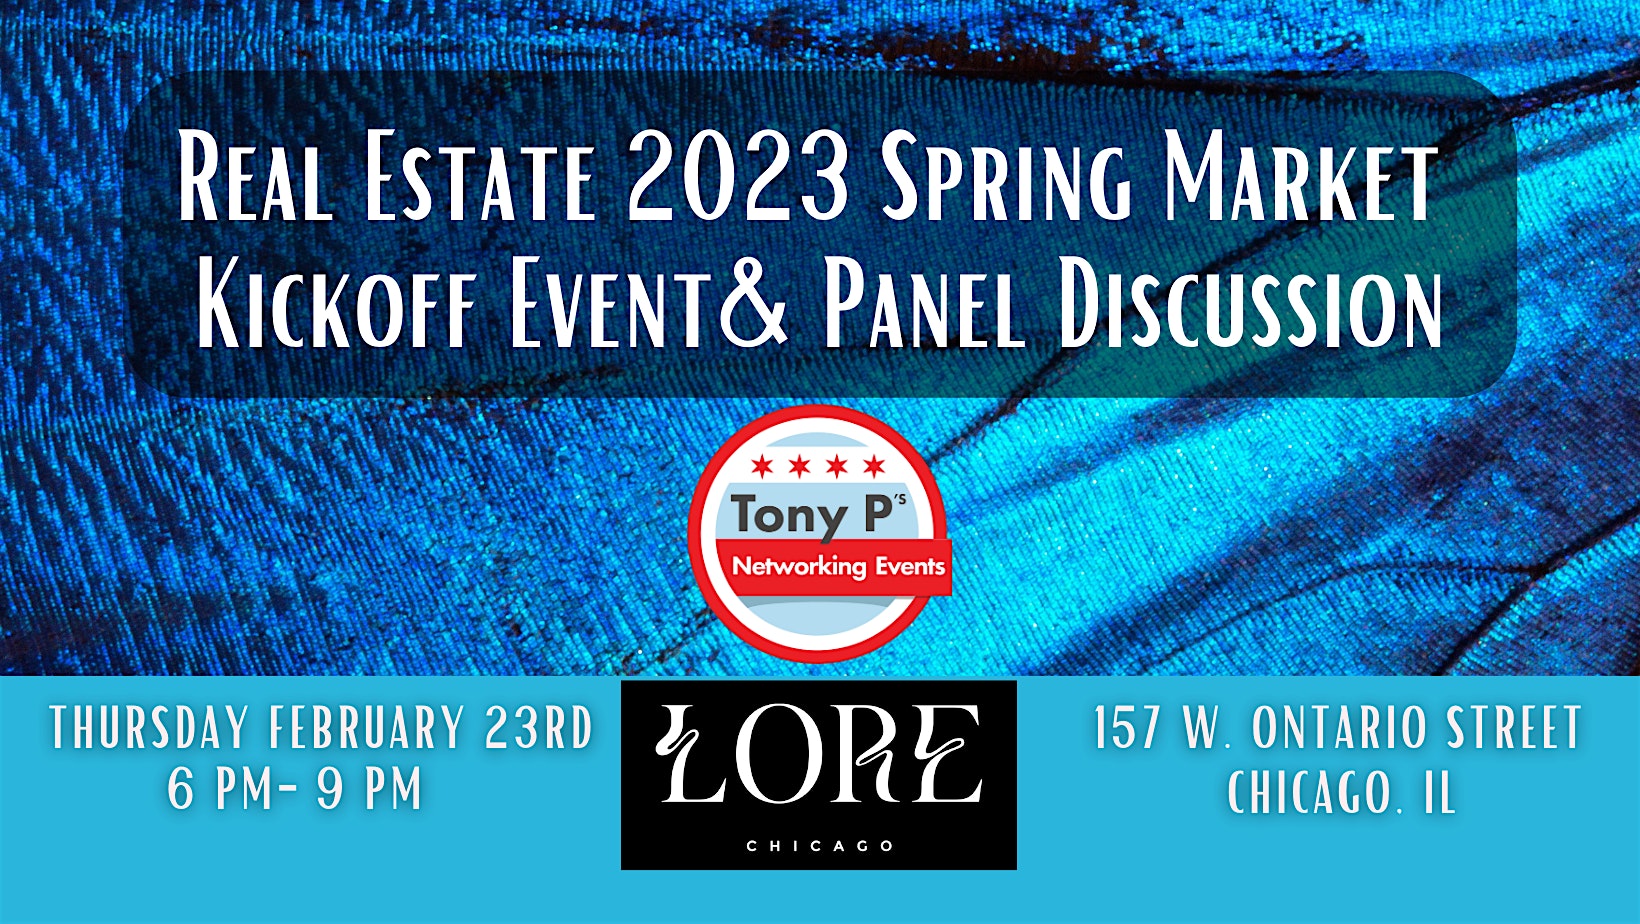 Real Estate 2023 Spring Market Kickoff Event at Lore: February 23rd